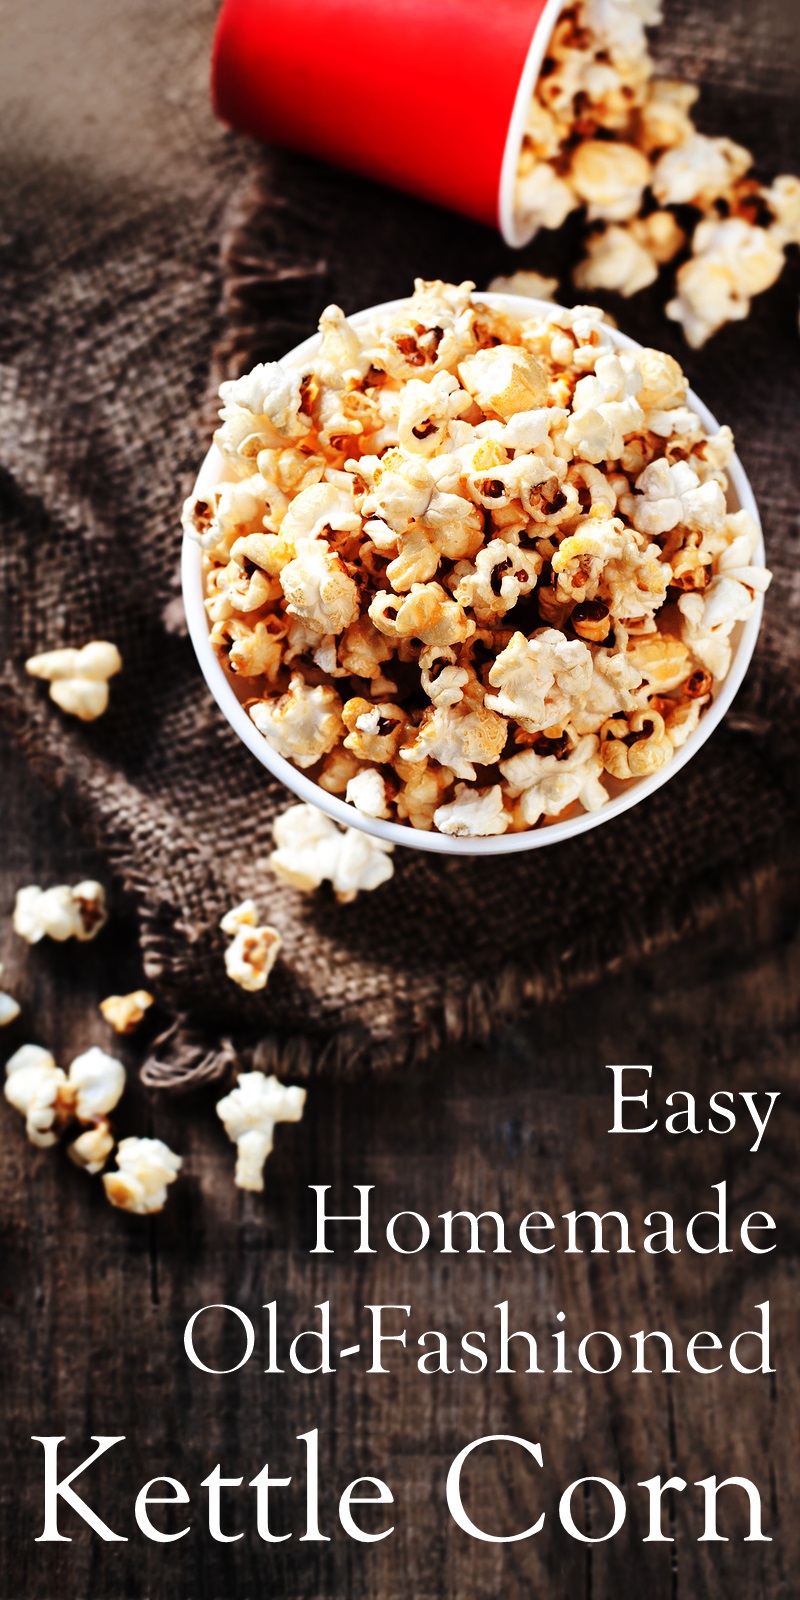 Old-Fashioned Homemade Kettle Corn Recipe - A naturally dairy-free, gluten-free, vegan and allergy-friendly treat